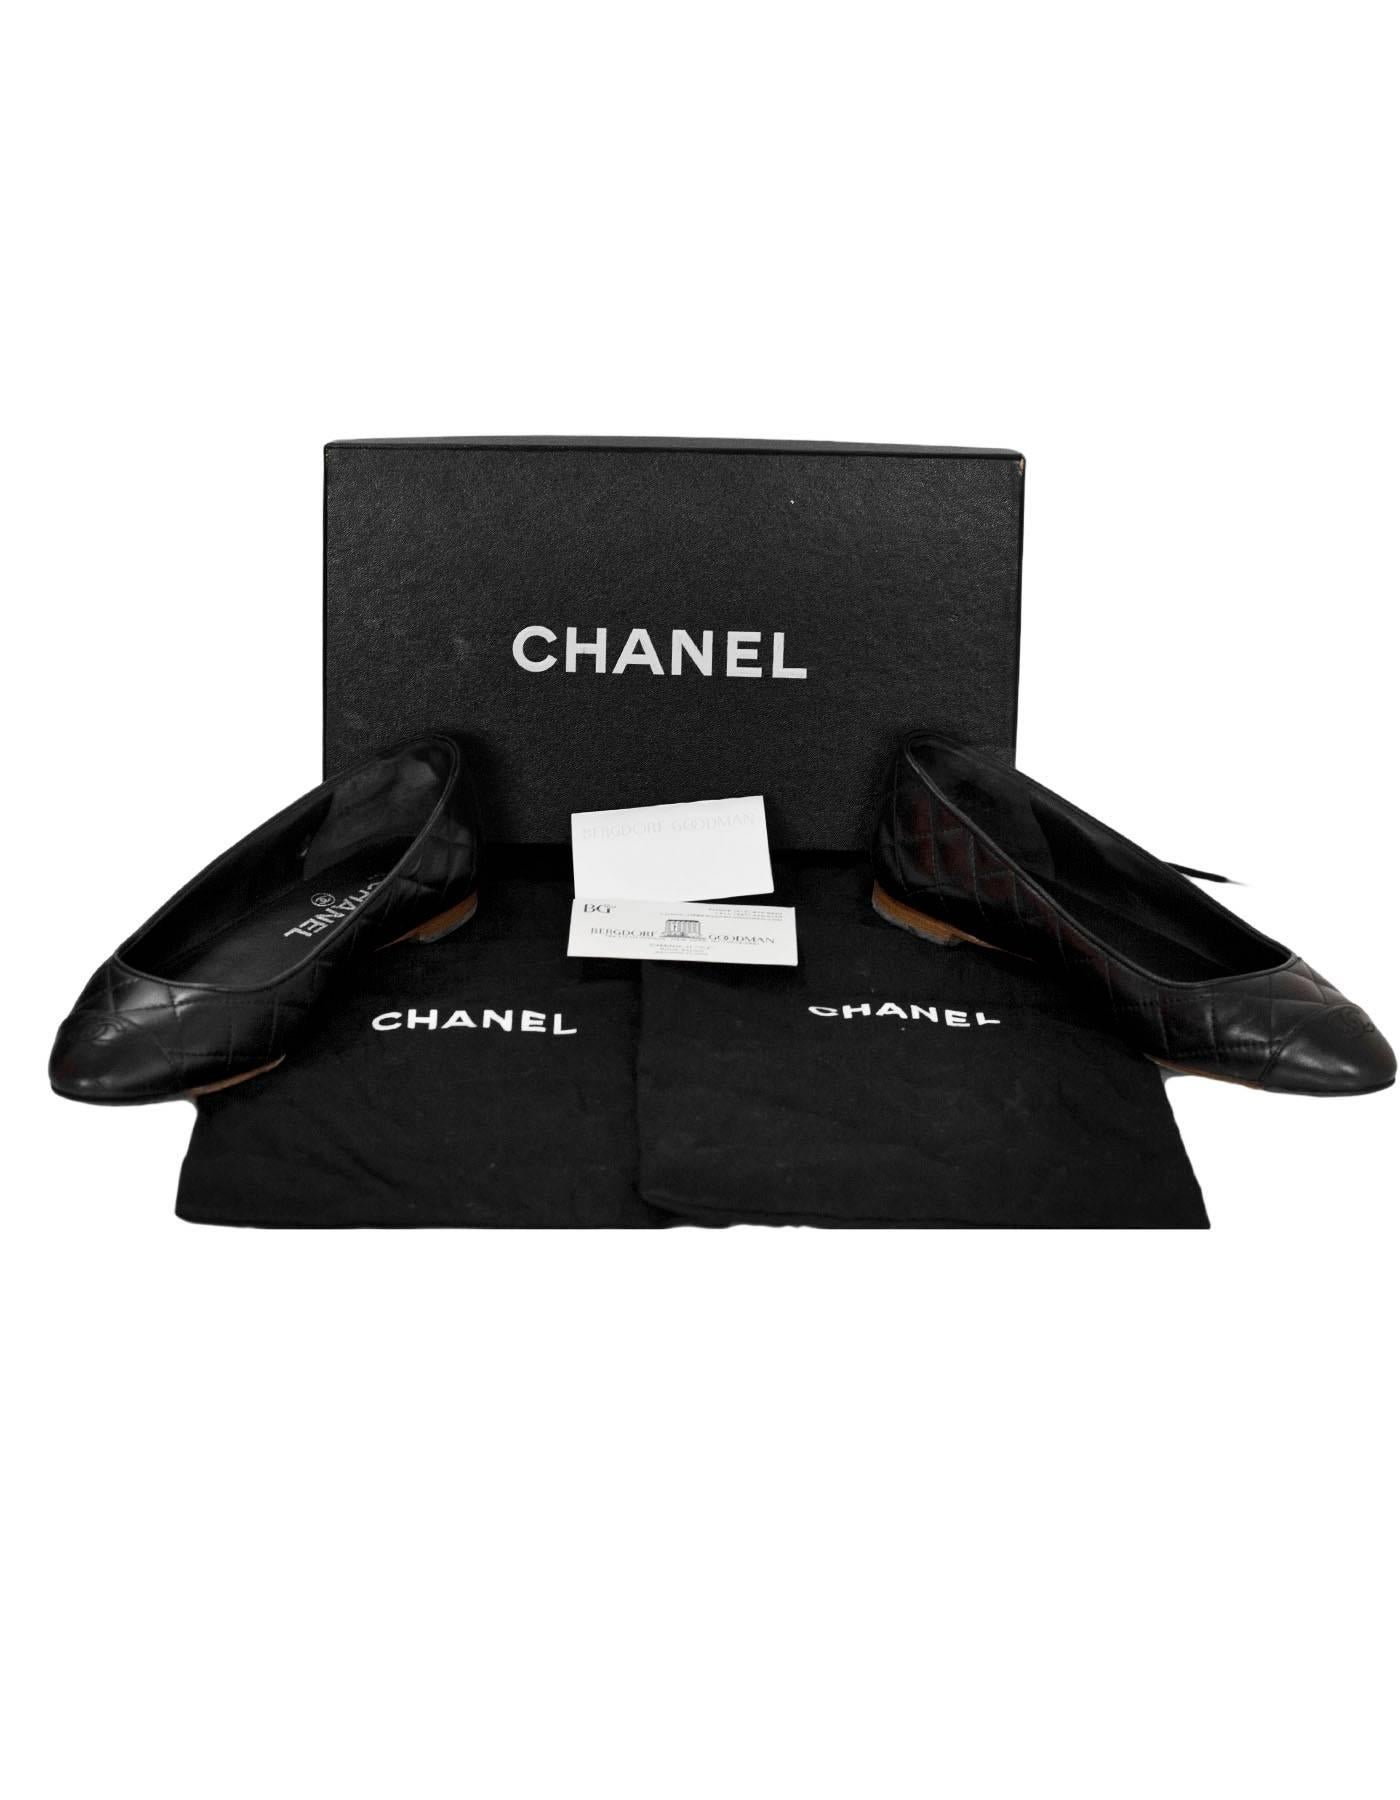 Chanel Black Quilted Leather Flats Sz 37 with Box 2